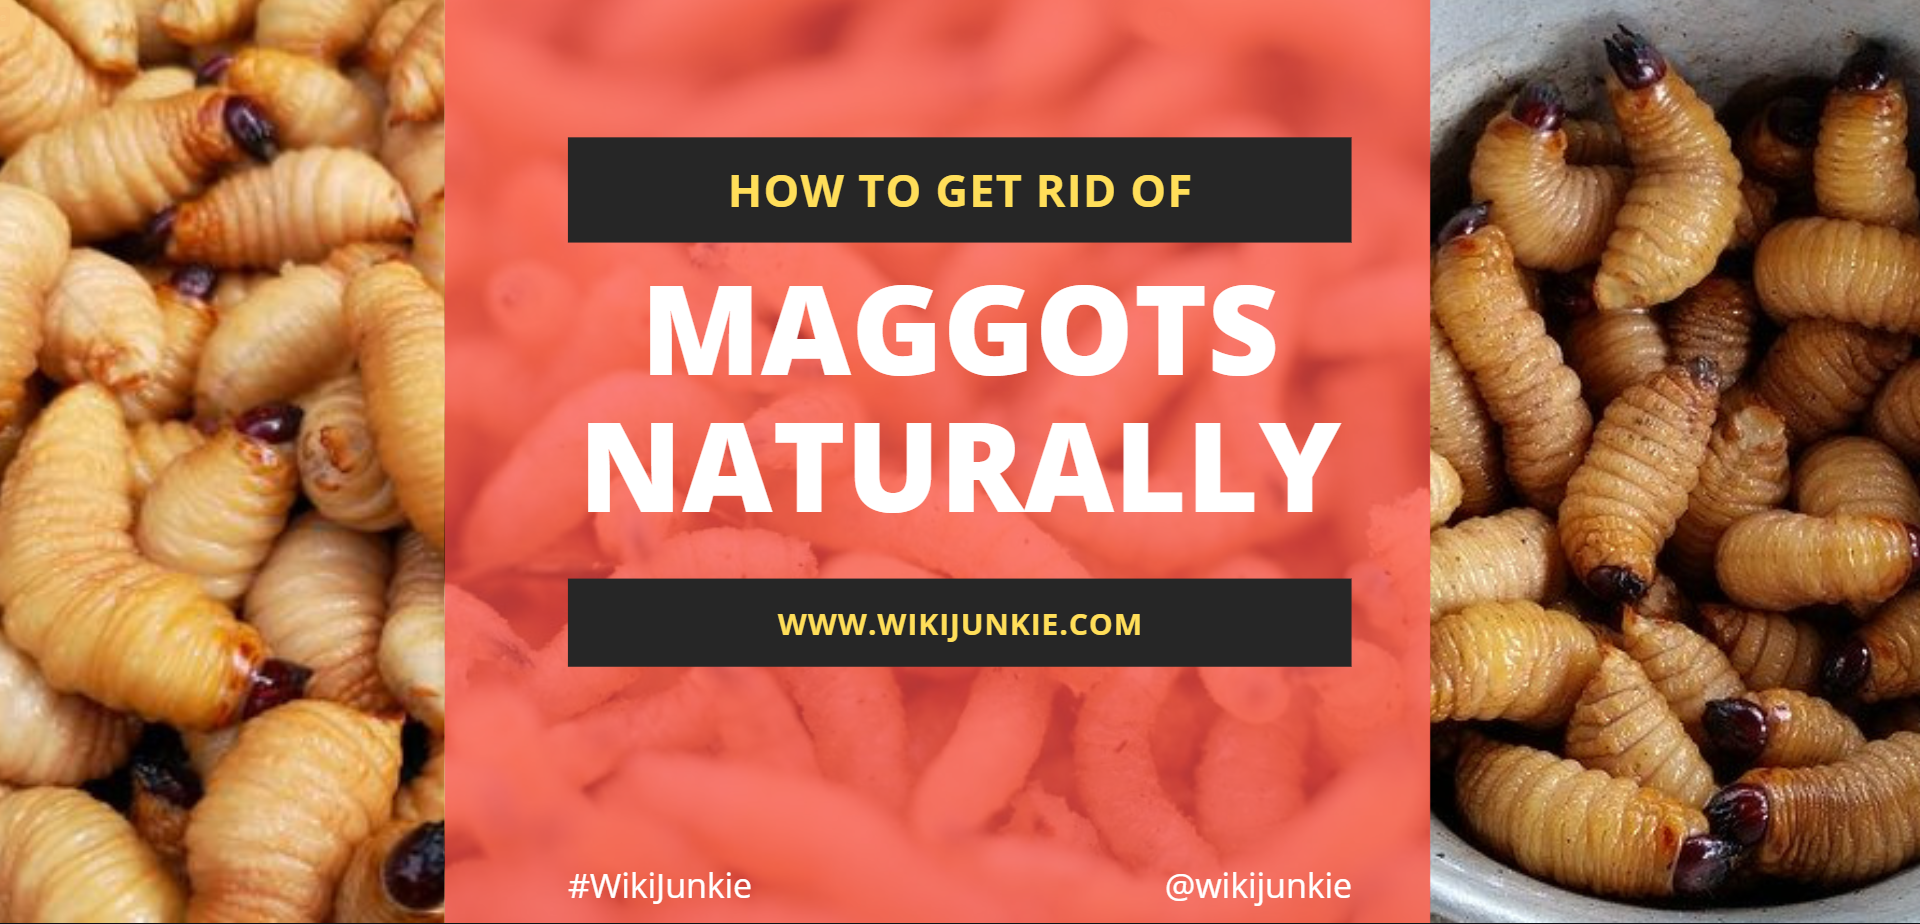 How to Get Rid of Maggots Naturally